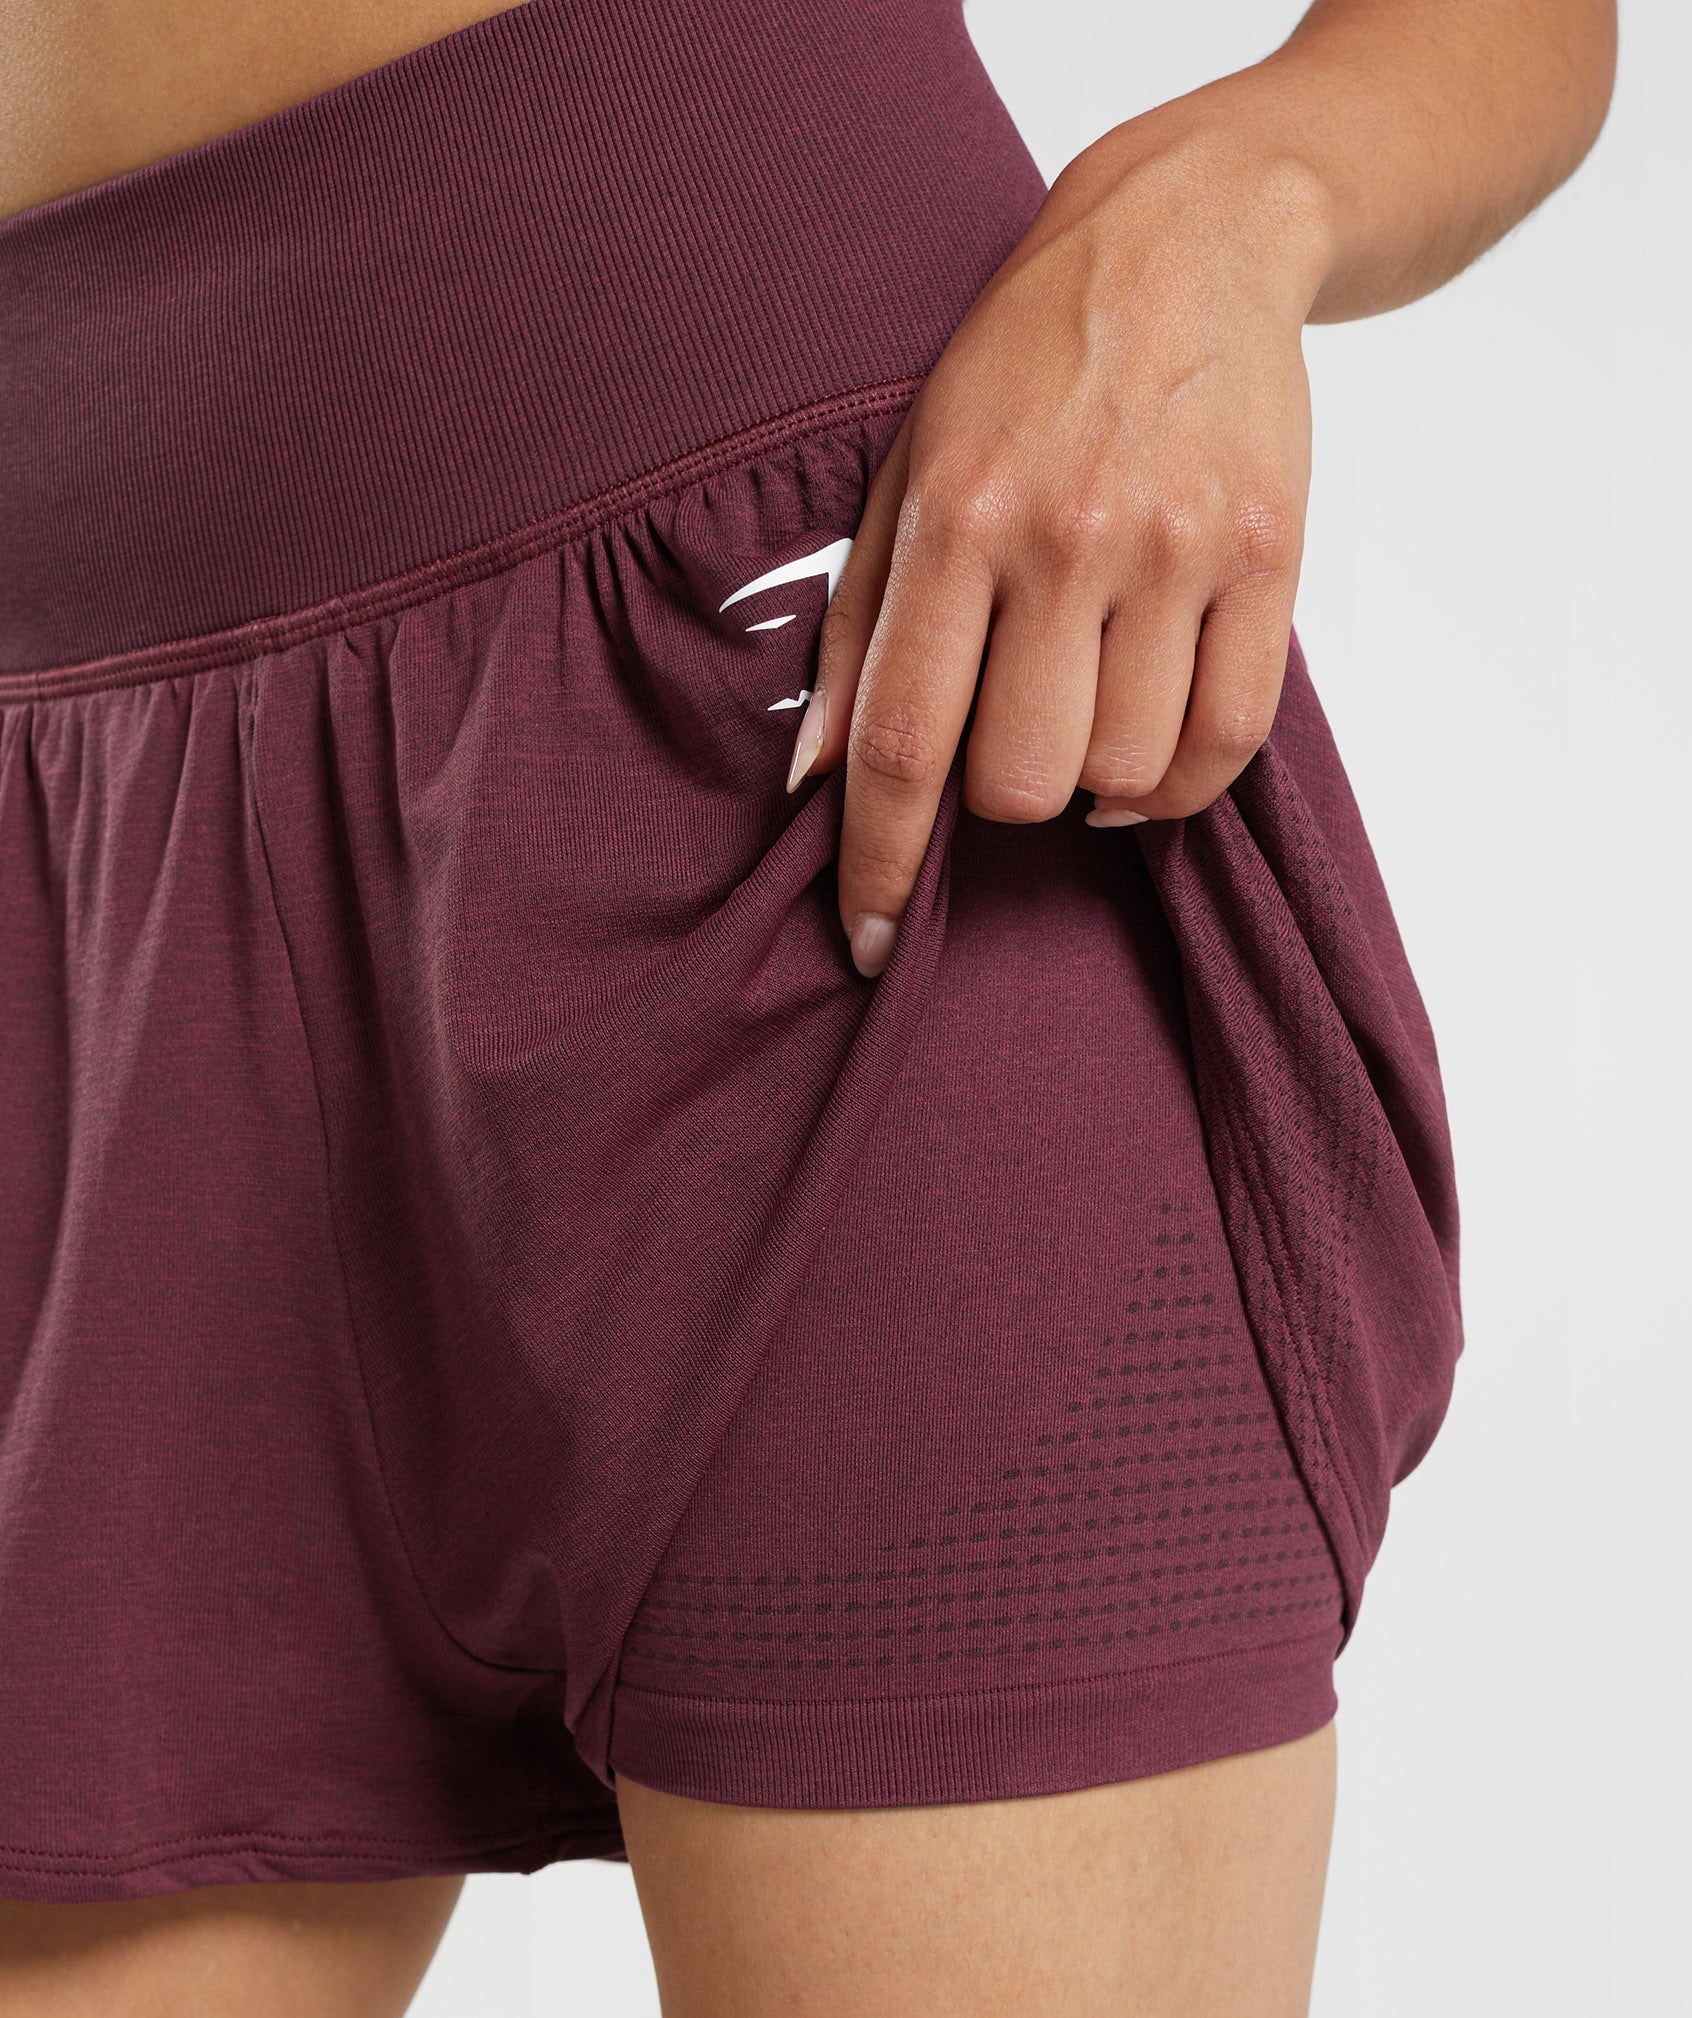 Vital Seamless 2.0 2-in-1 Shorts in Baked Maroon Marl - view 5